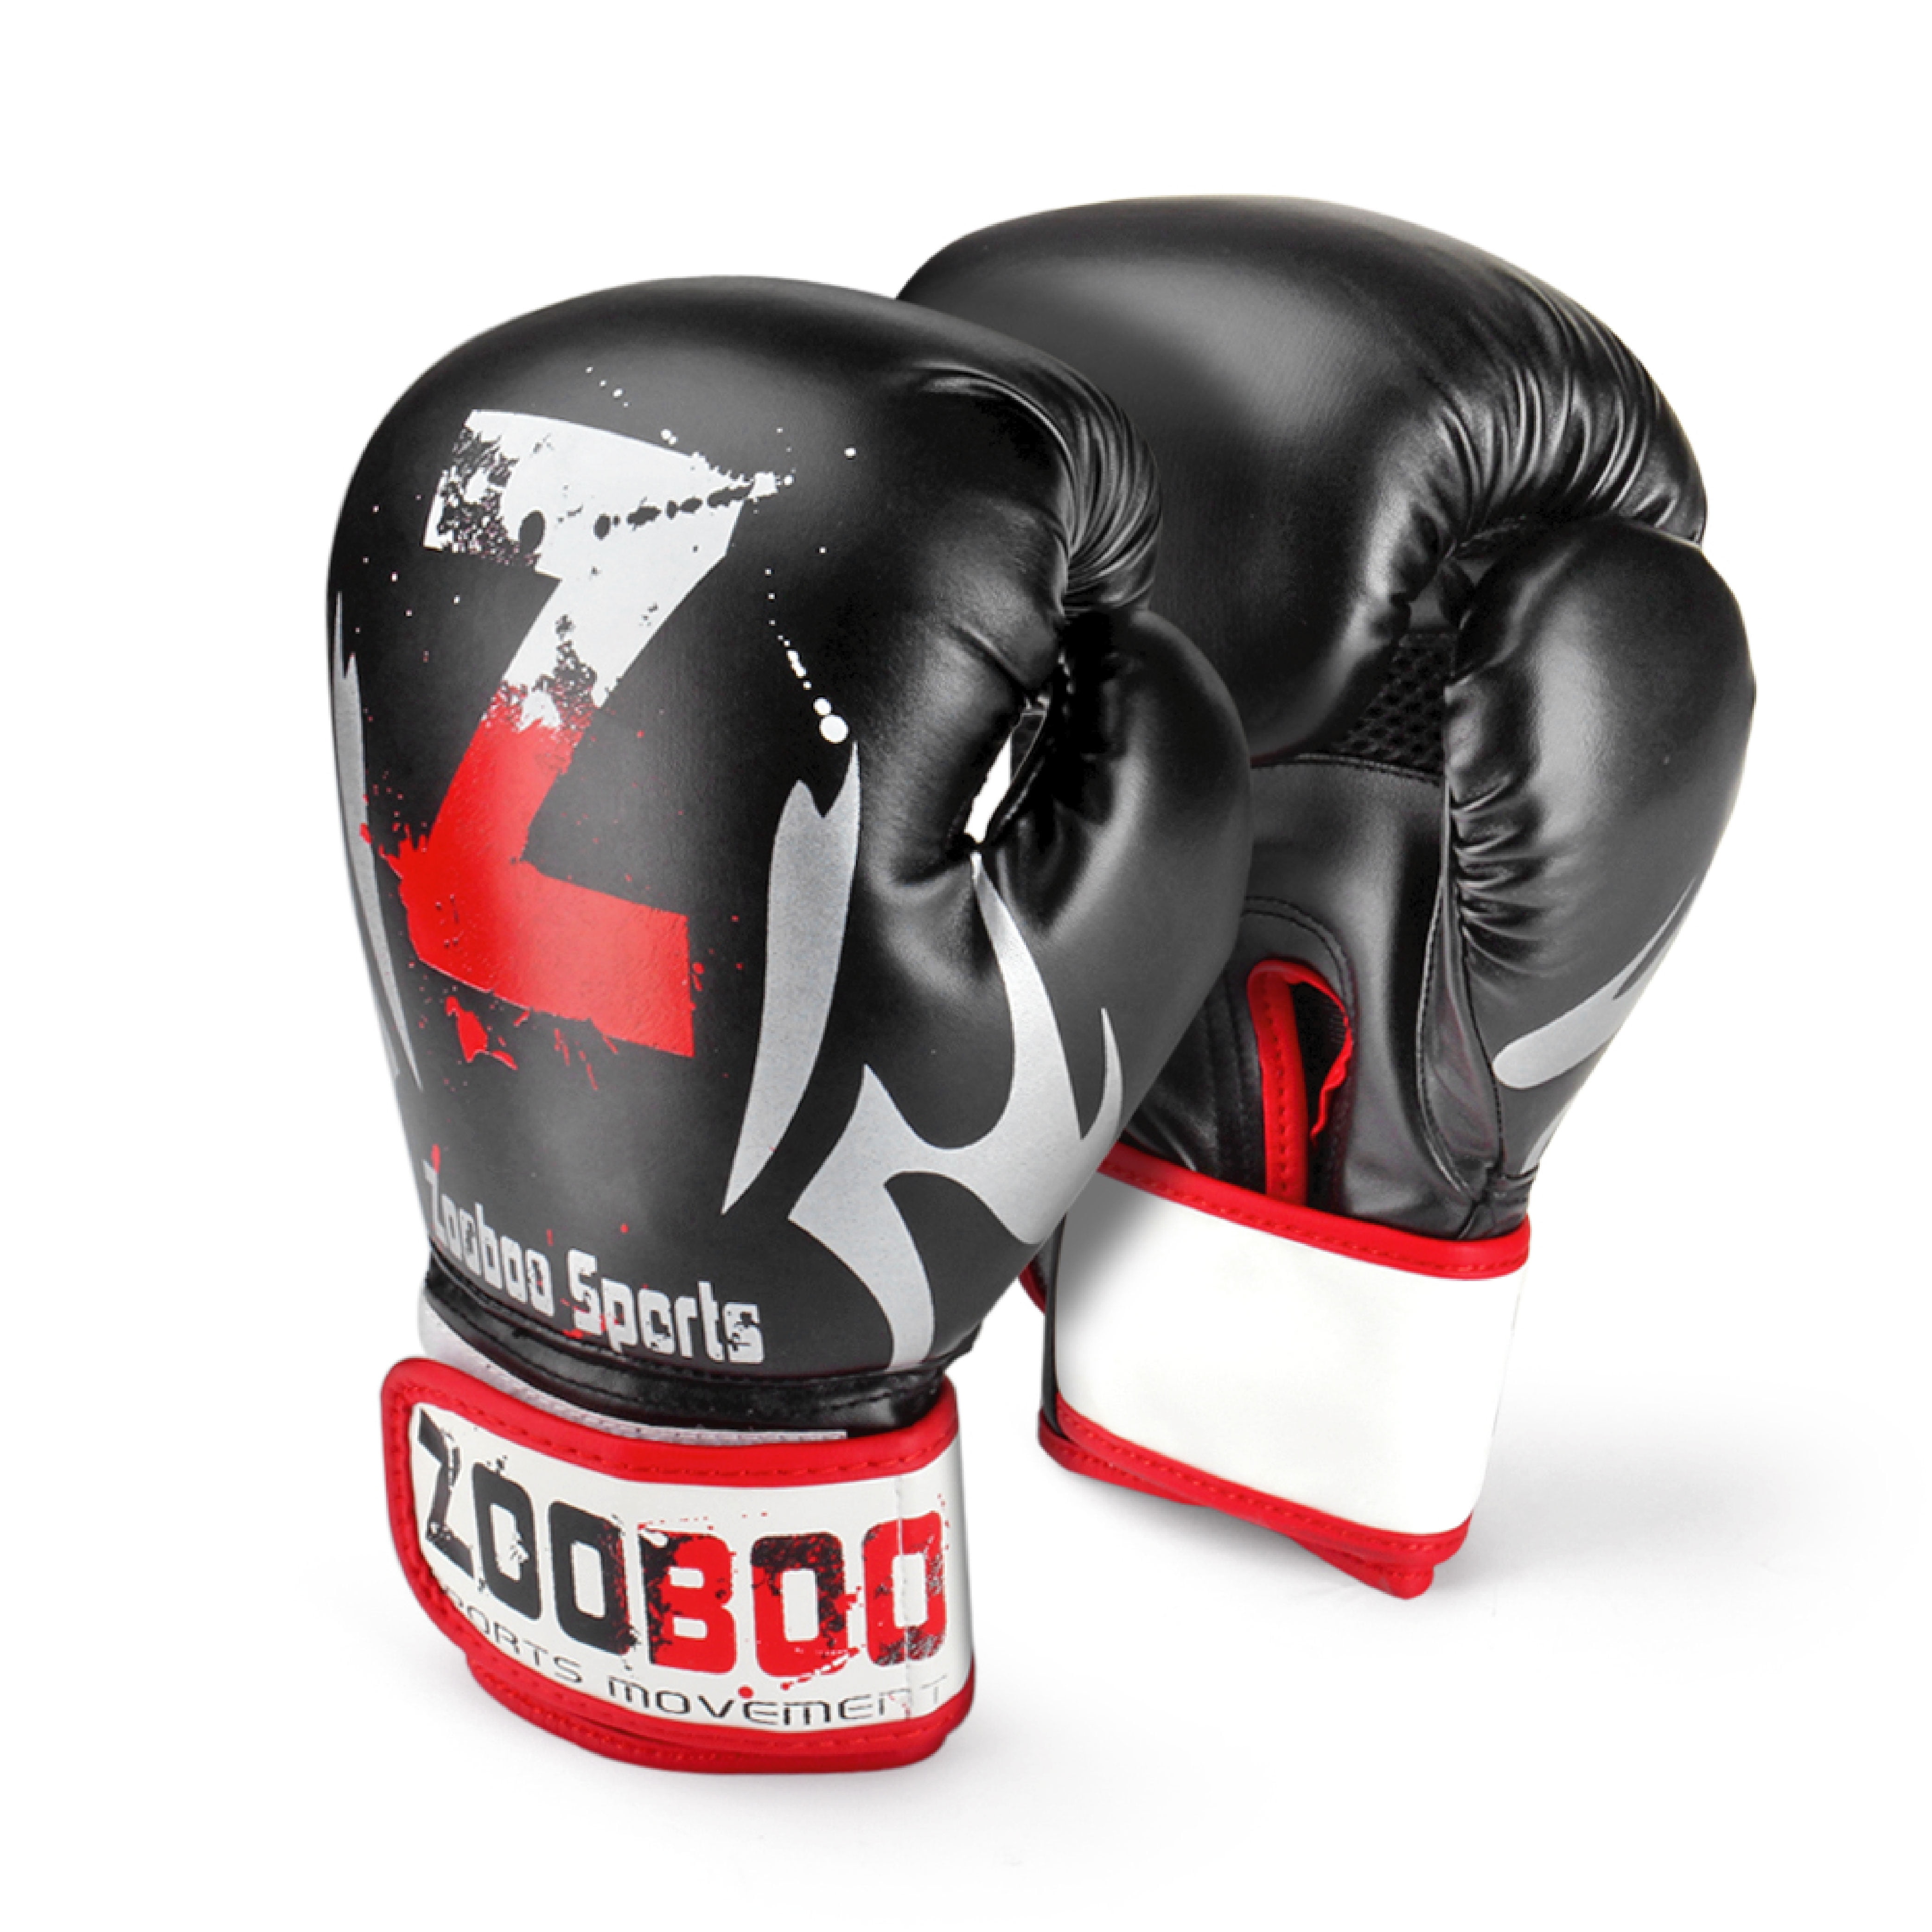 Ingrijpen Inspectie Omgeving 10 oz Boxing Gloves for Men, Youth, and Women, Black Boxing Gloves Punching  Bag Gloves 10oz Ounce for KickBoxing, MMA, Muay Thai, Training, Sparing,  Bagwork with Wrist Wrap - Walmart.com